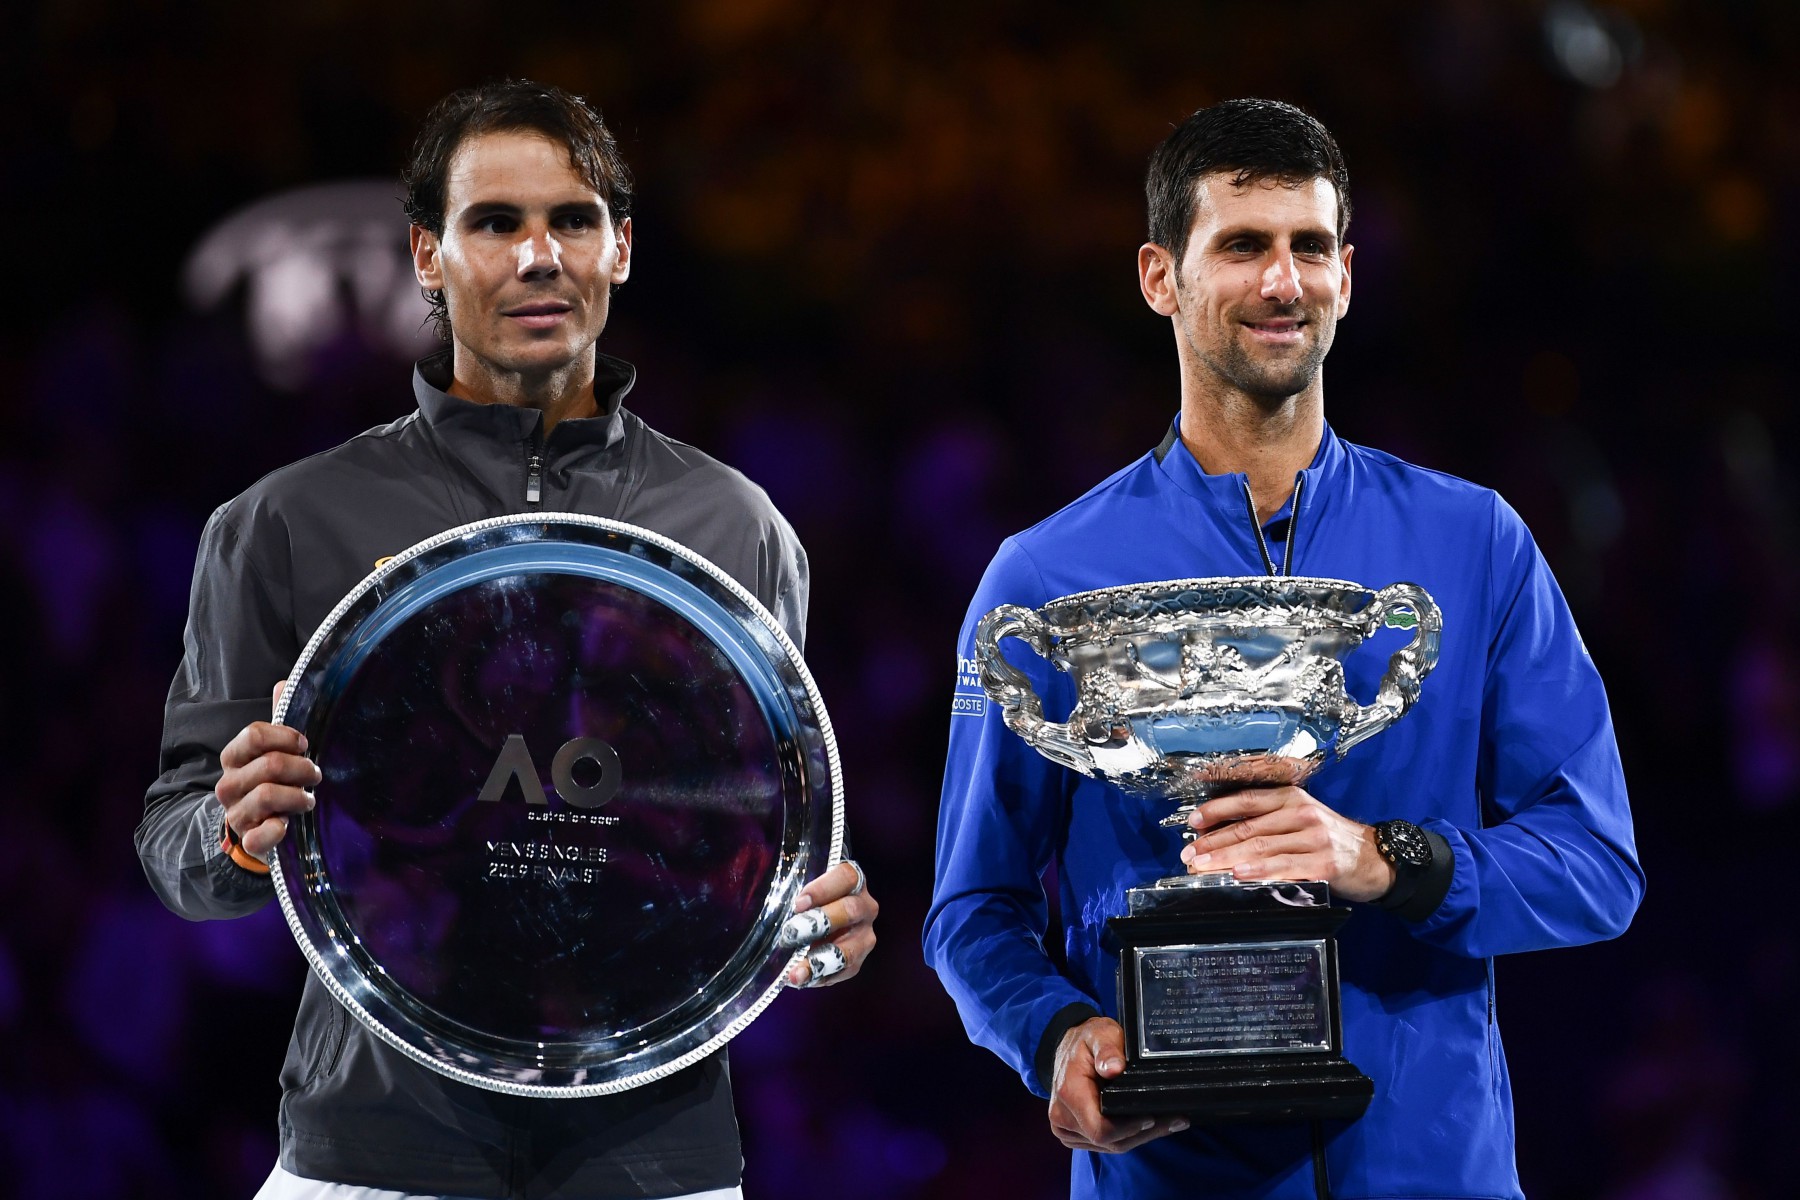 The battle for the year-end world No1 between Rafael Nadal and Novak Djokovic come down to the final tournament of the season